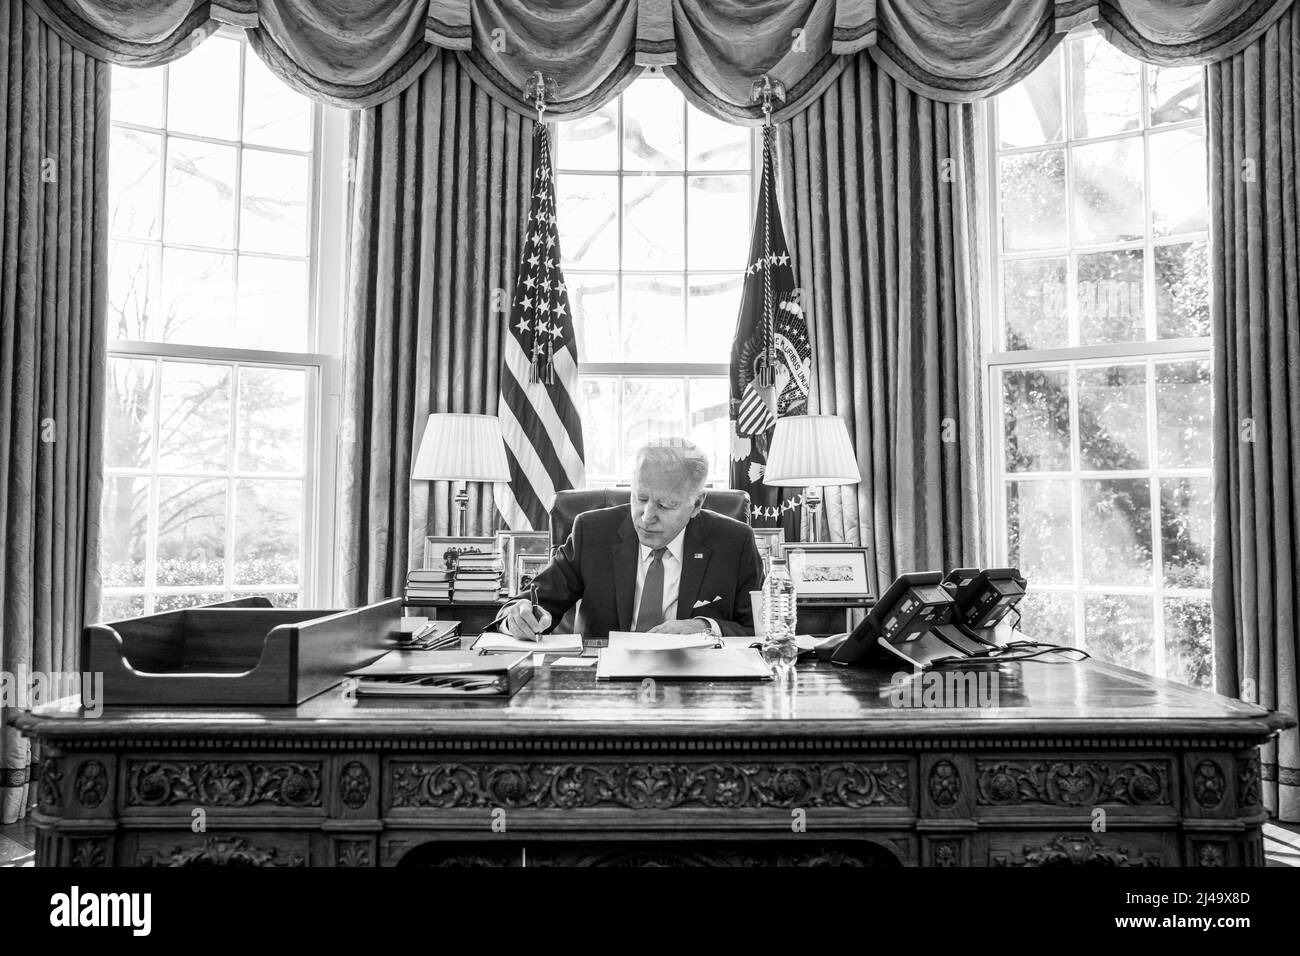 President Joe Biden participates in a secure call with transatlantic leaders regarding Russia’s invasion of Ukraine, Monday, February 28, 2022, in the Oval Office. (Official White House Photo by Adam Schultz) Stock Photo